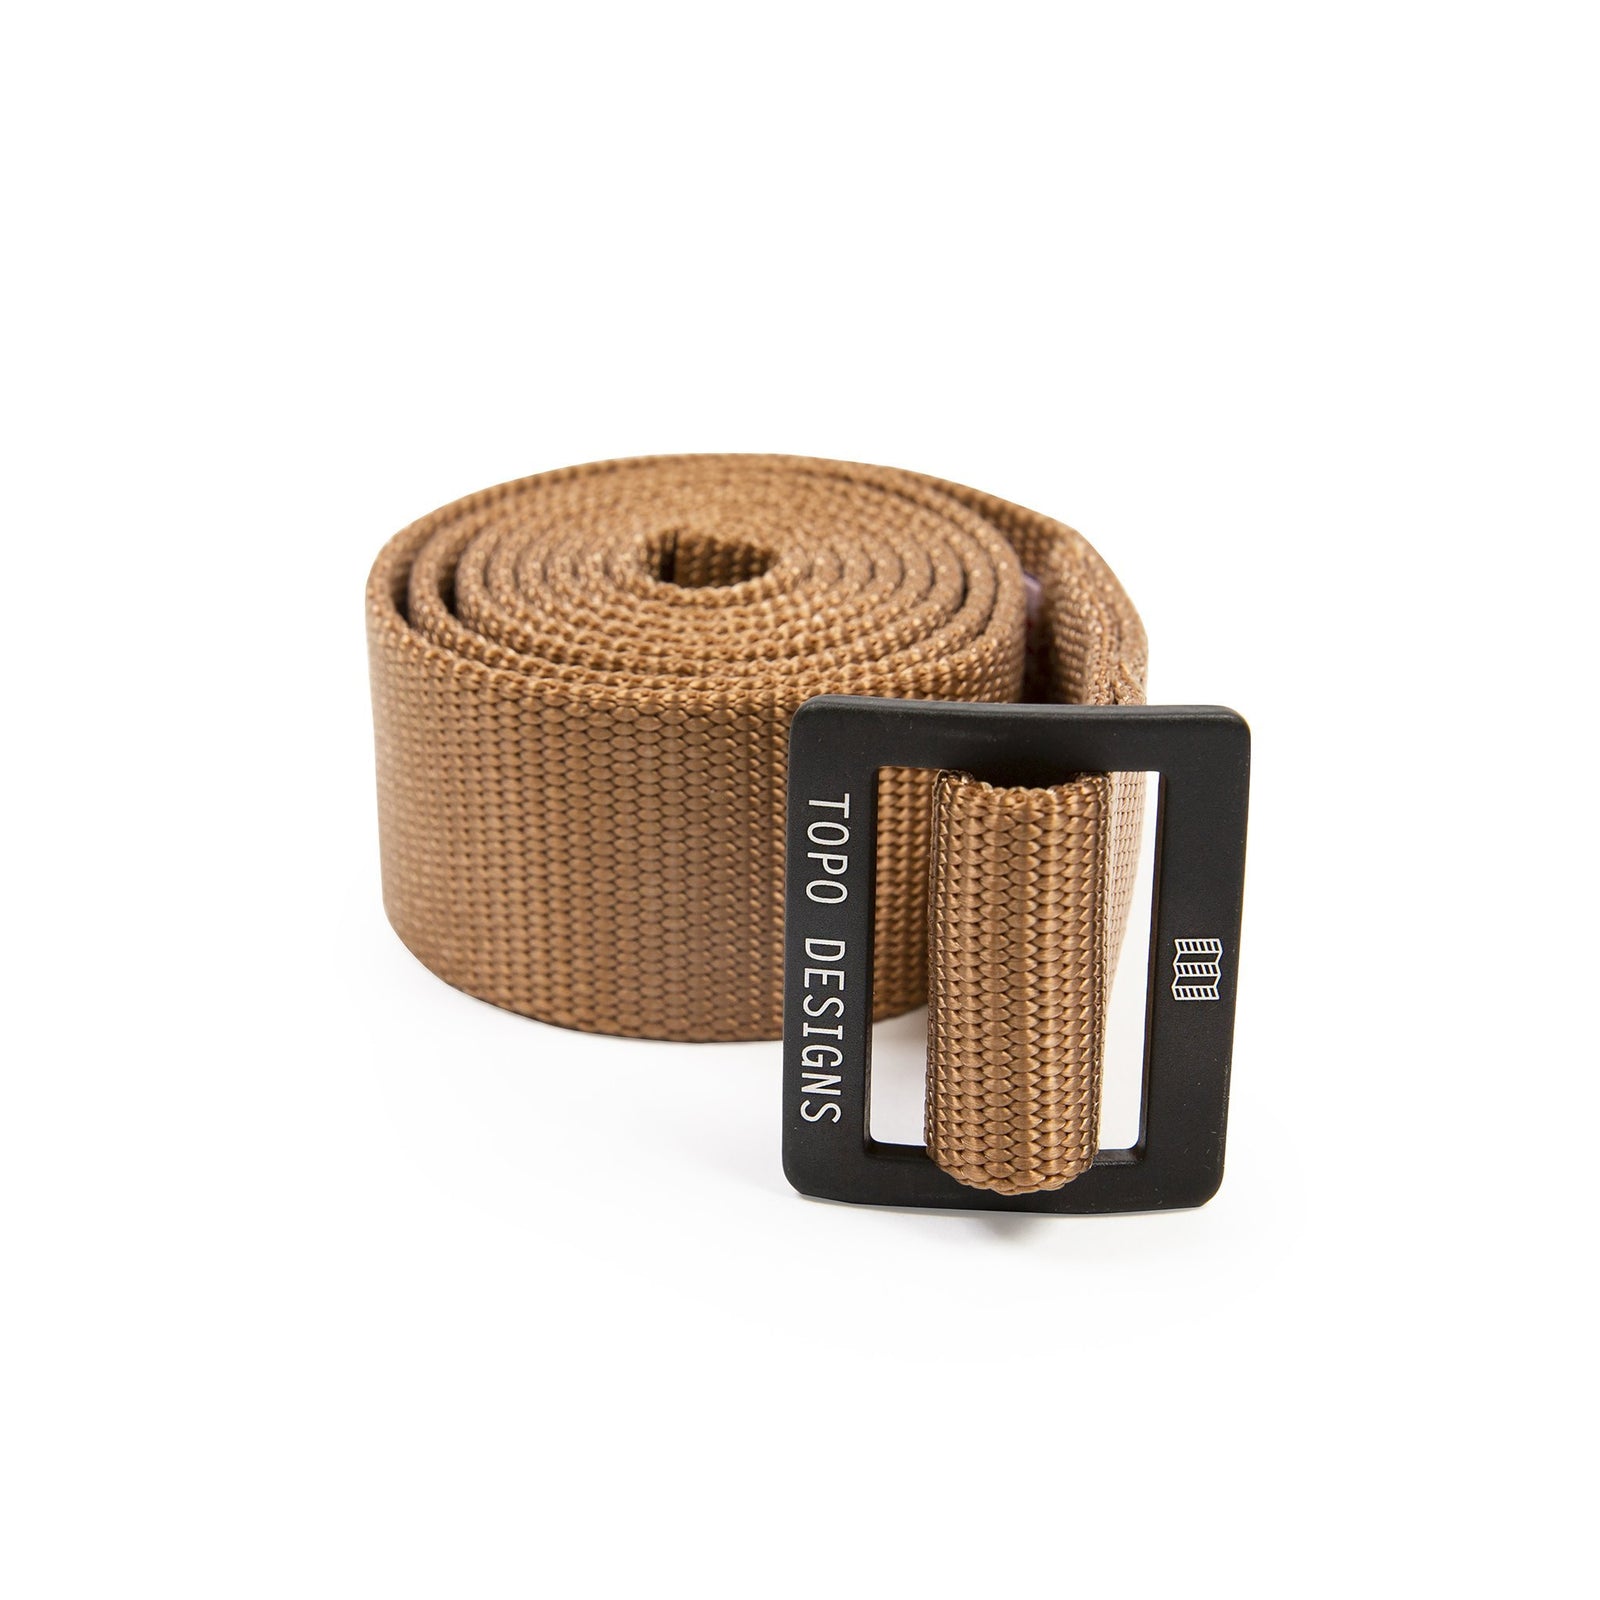 Topo Designs web belt in "khaki" brown with black buckle